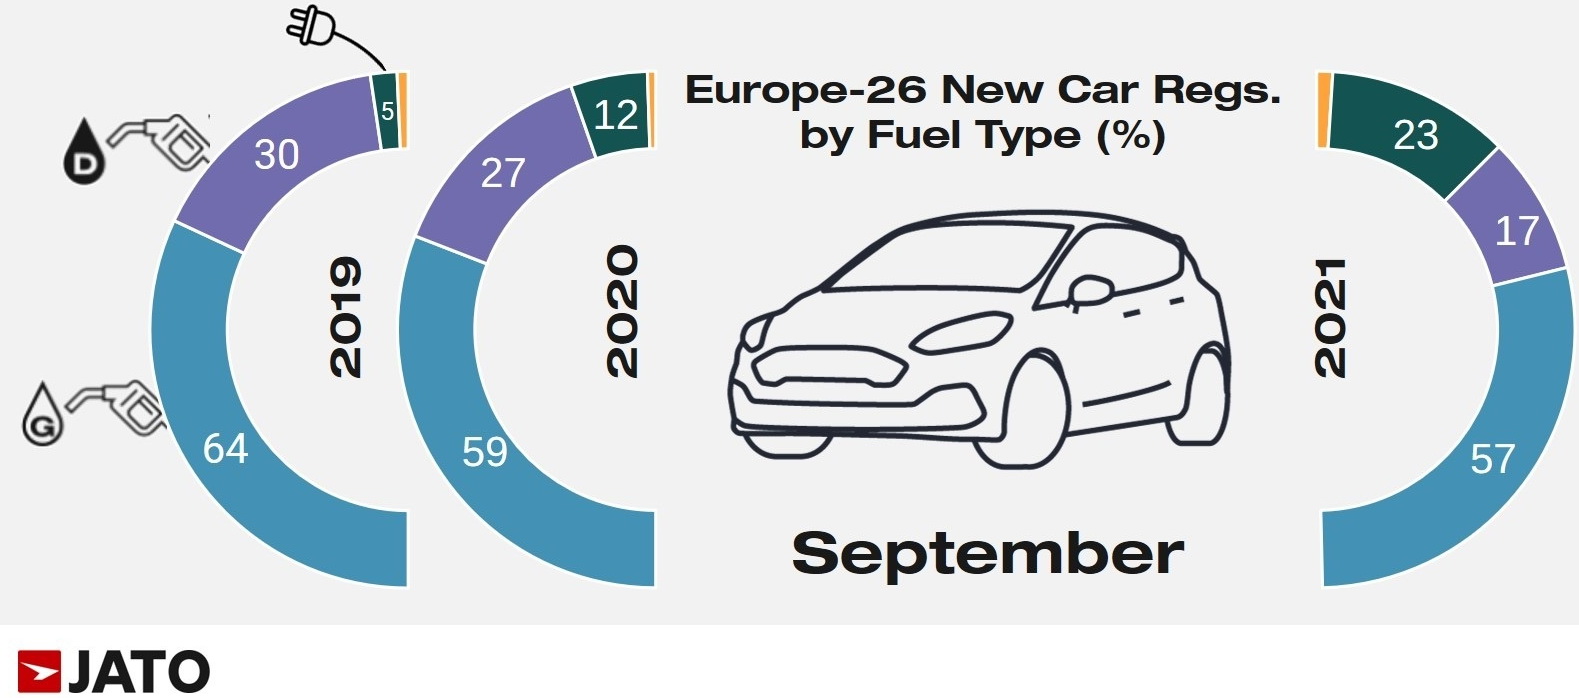 Jato Table, European Car Registrarion Sep '21 by fuel type